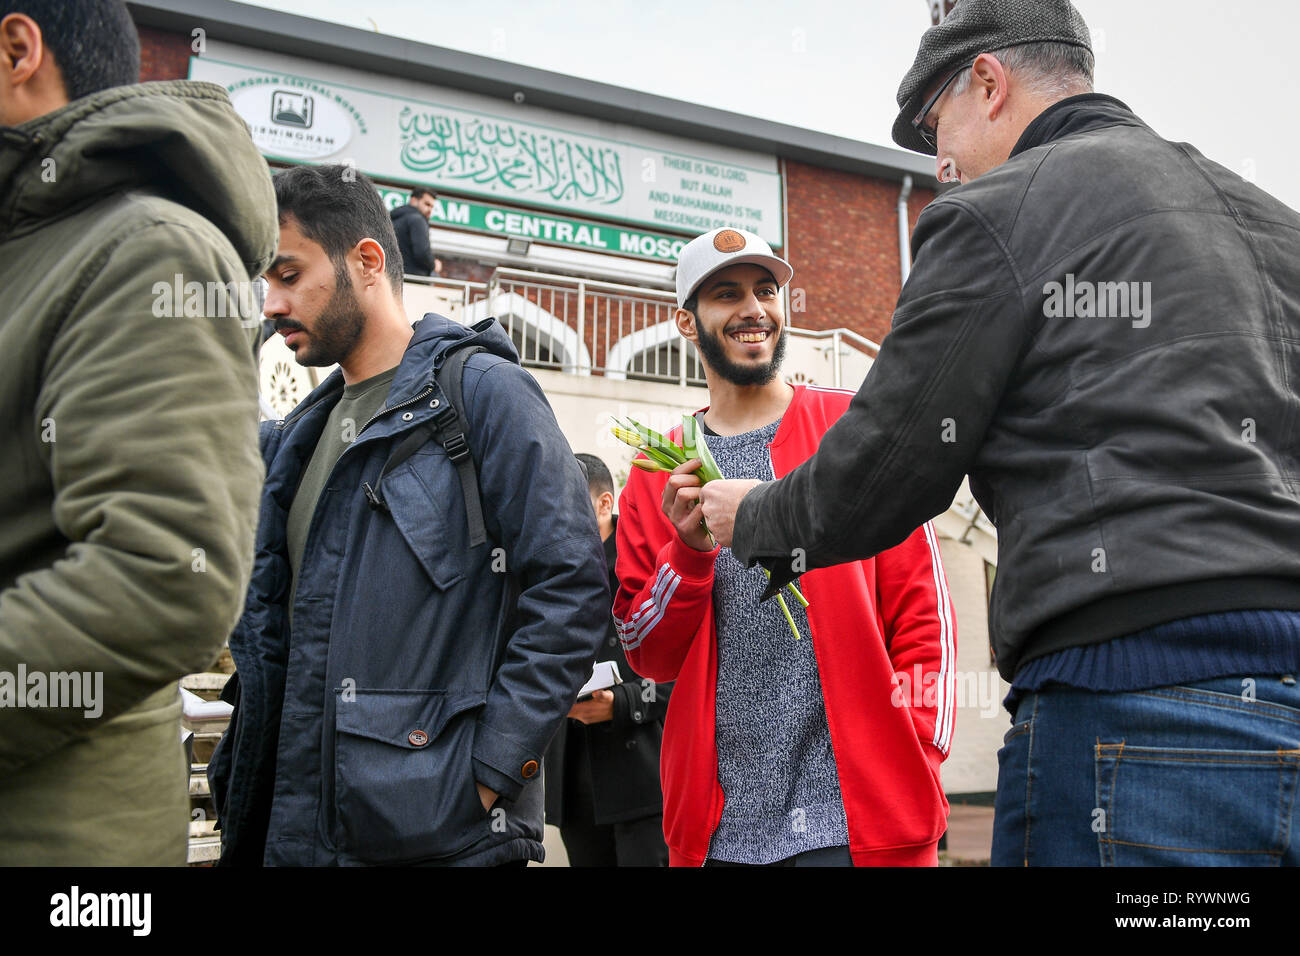 A man smiles as Christian James Lynch, from Riverside Church, hands out flowers to Muslims as they leave Birmingham Central Mosque as Friday prayers finish after the attack on the Mosque in Christchurch, New Zealand. Stock Photo